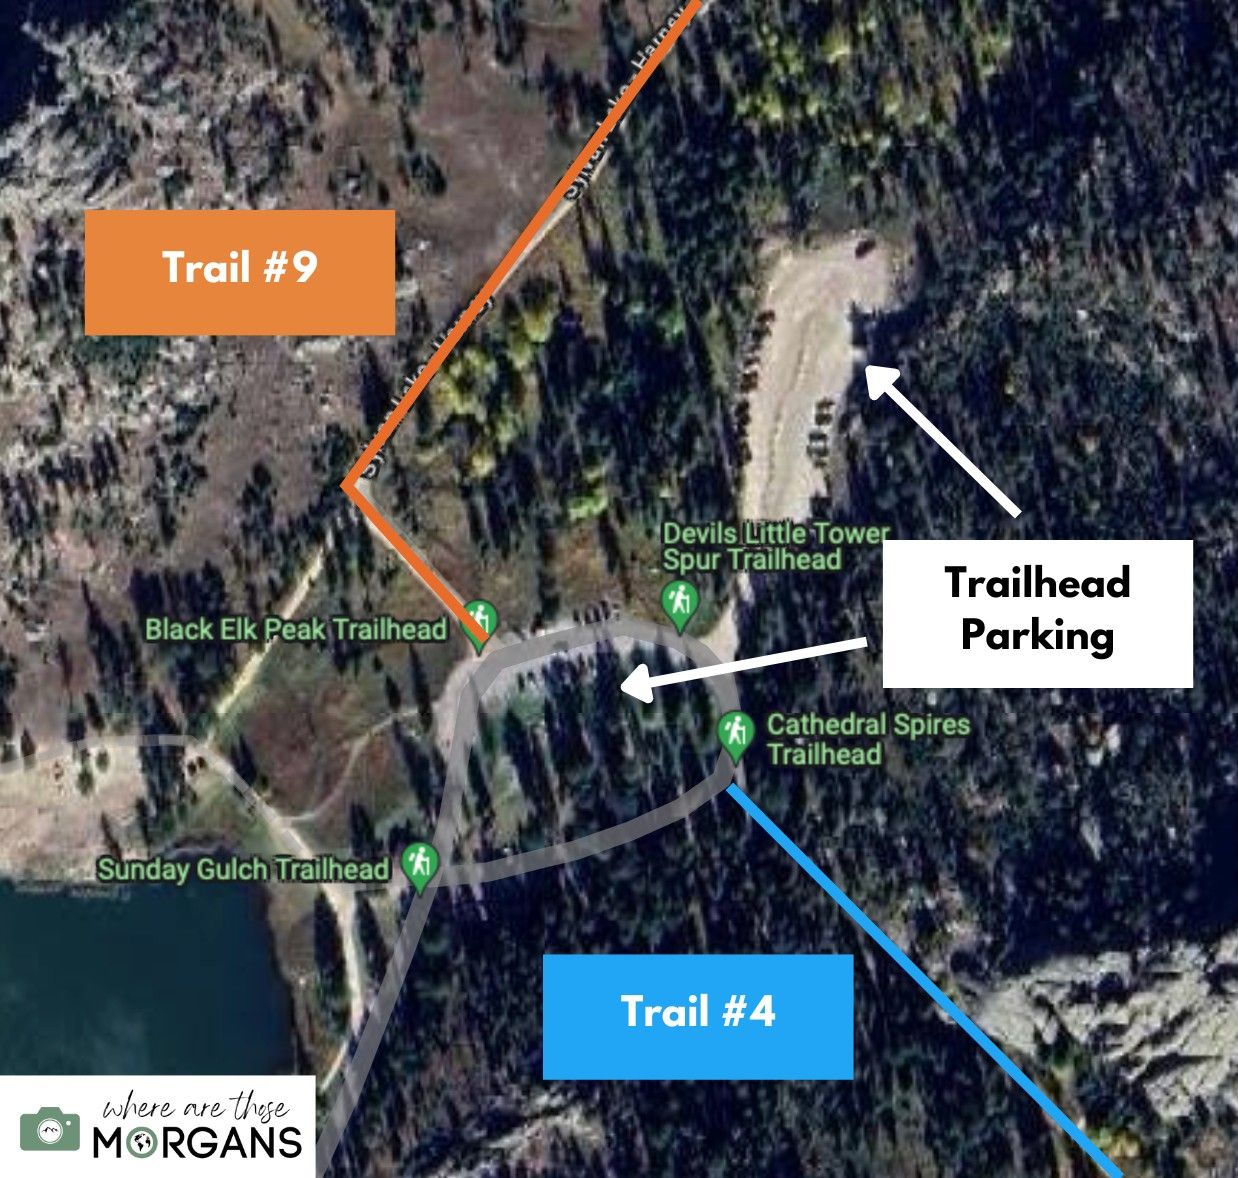 Map showing the parking lots at Black Elk Peak trailhead with route 4 and route 9 mapped for reference